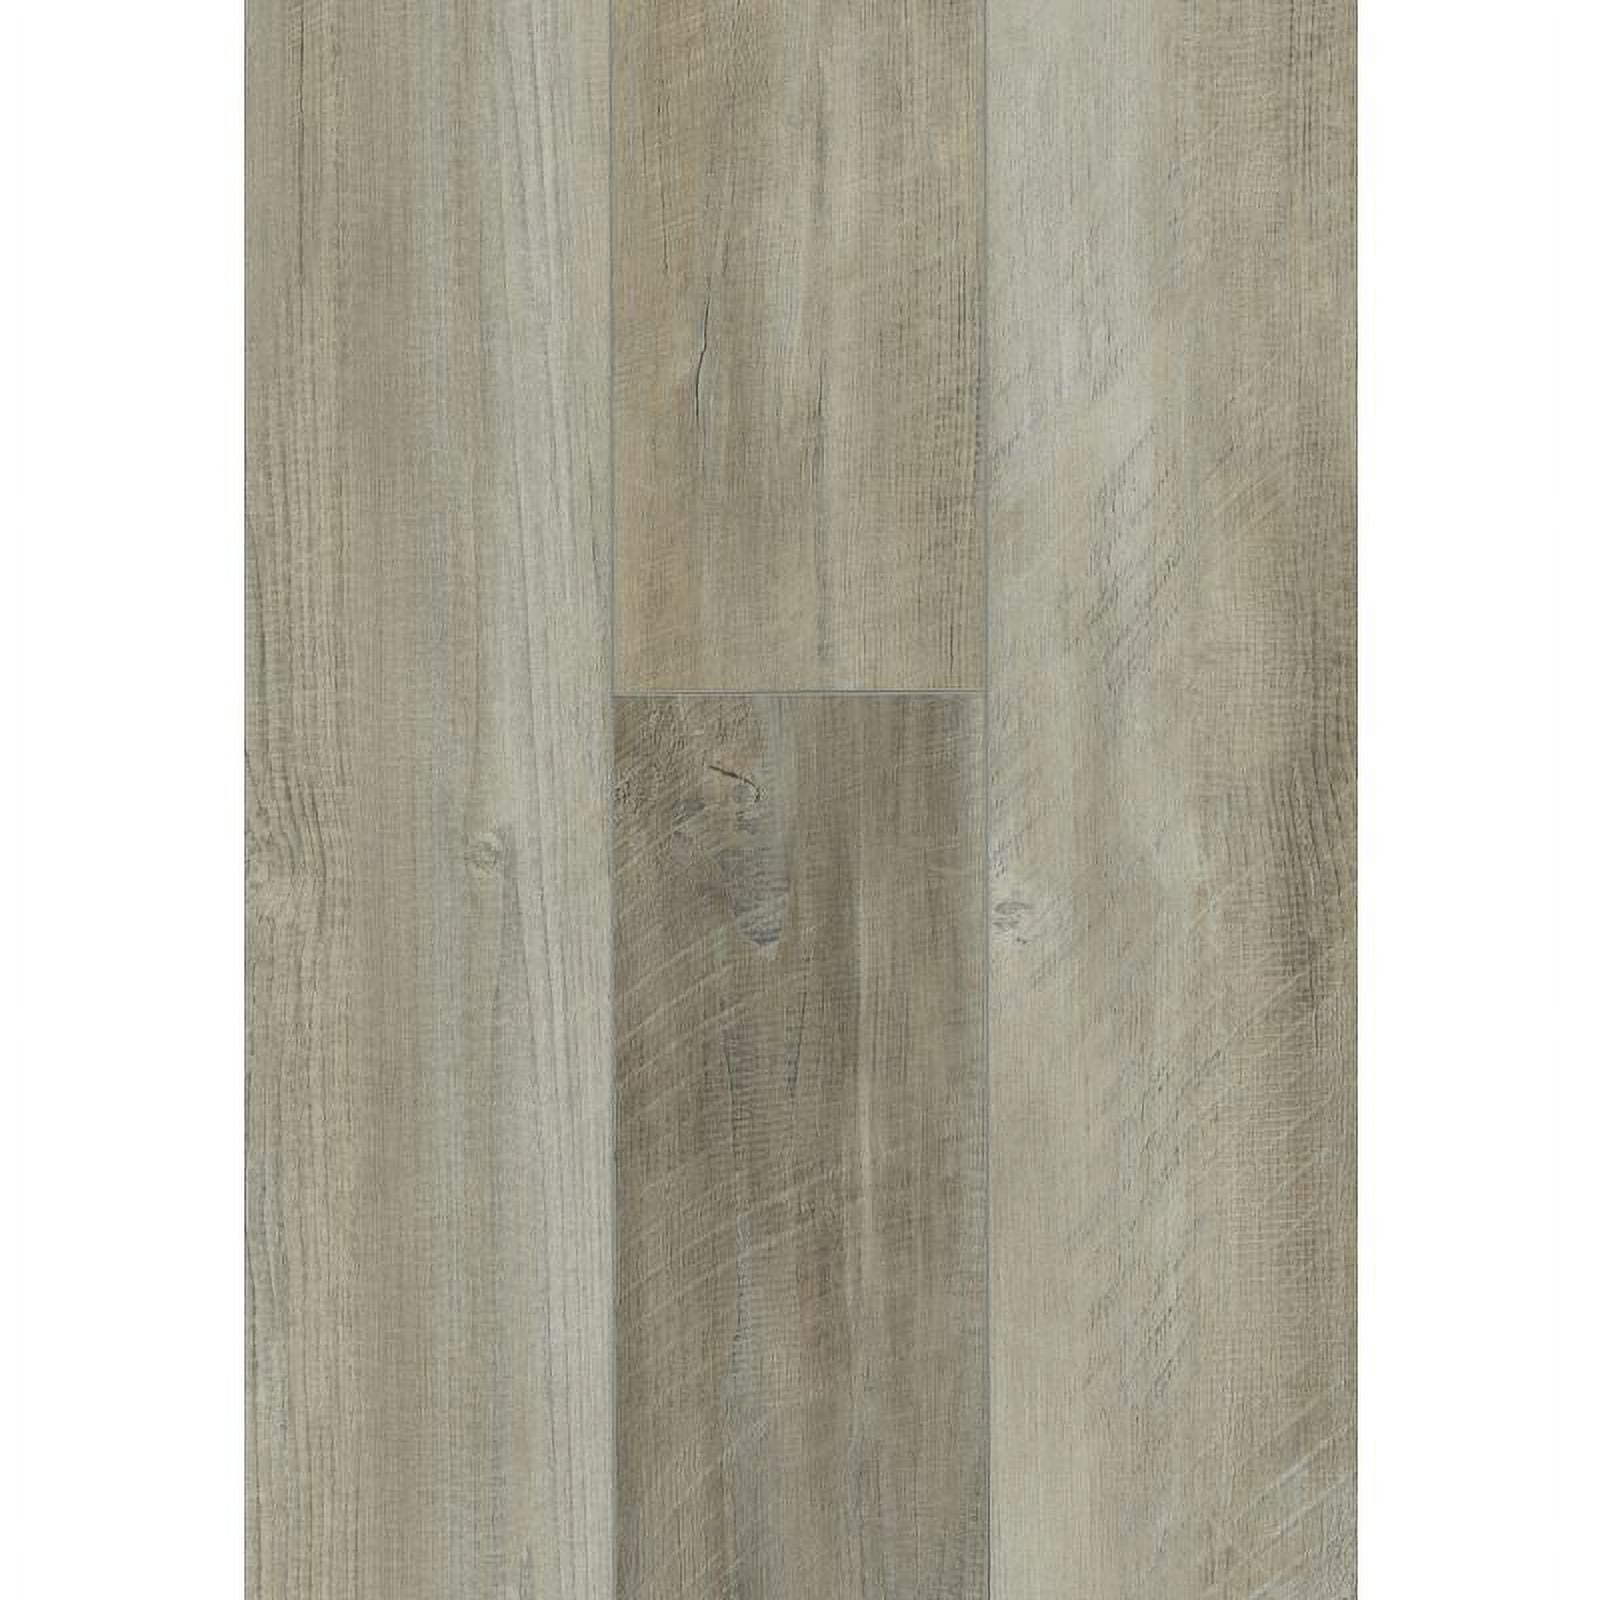 3/4 J-Channel Stained Forest Brown - Piece - 39AC56695PC - Timbermill  Siding